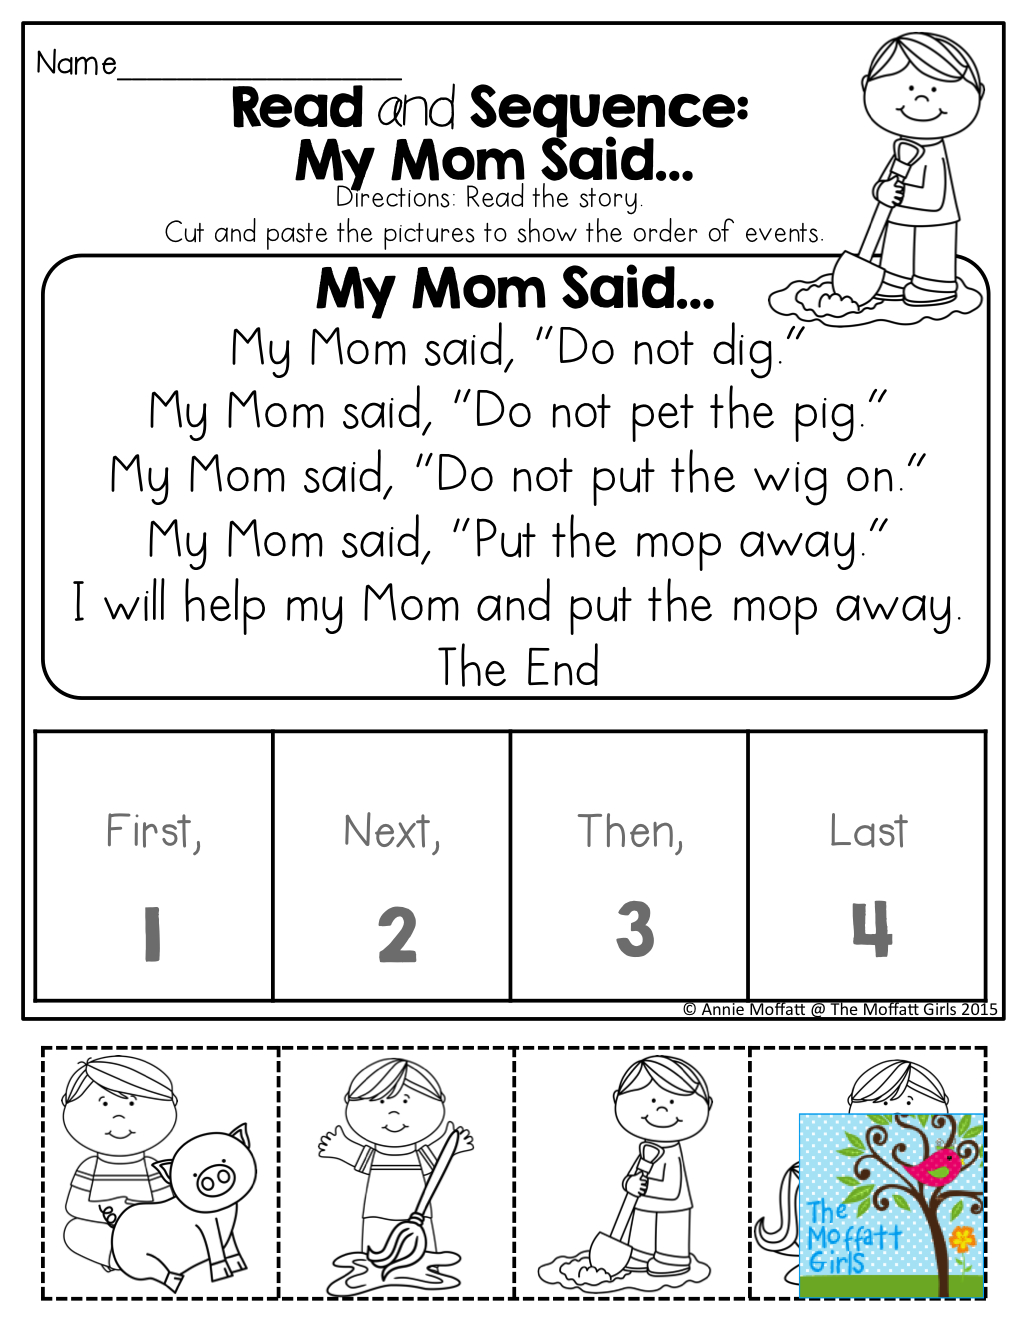 Free Printable Sequencing Worksheets For Kindergarten Lexia s Blog